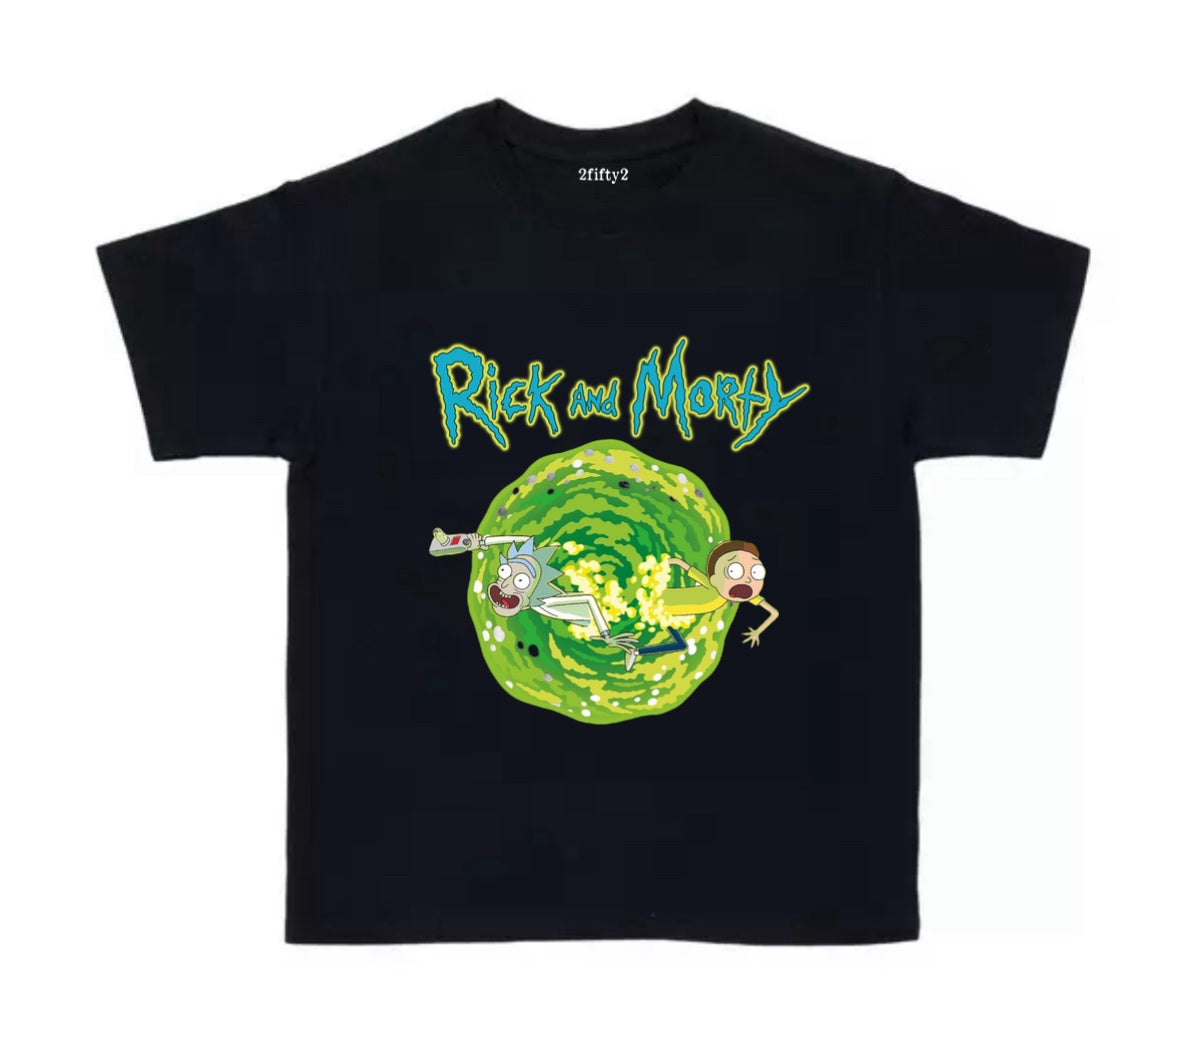 Graphic Rick and Morty tee